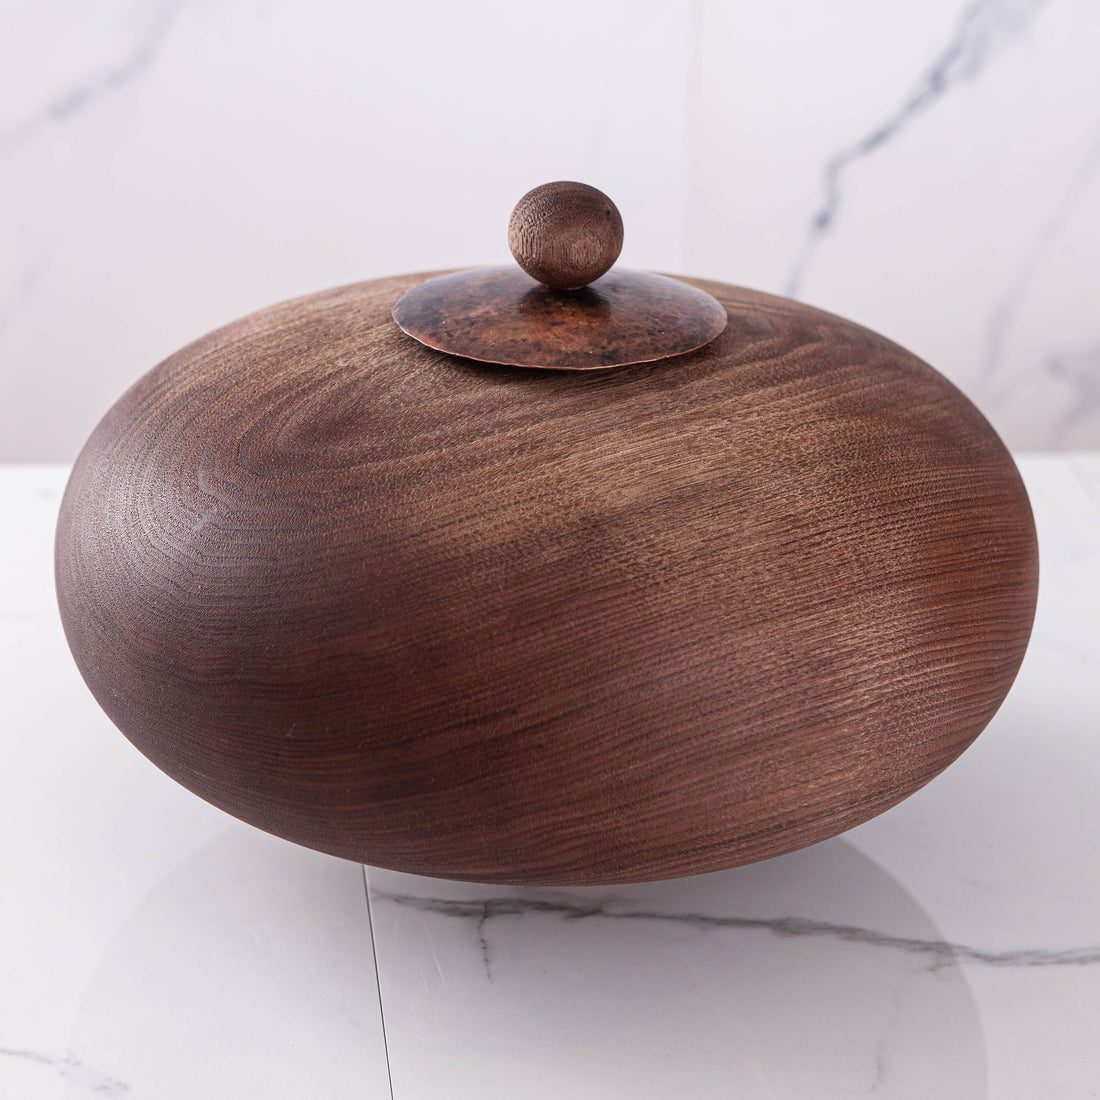 LIDDED VESSEL IN TEXTURED BLACK WALNUT AND COPPER